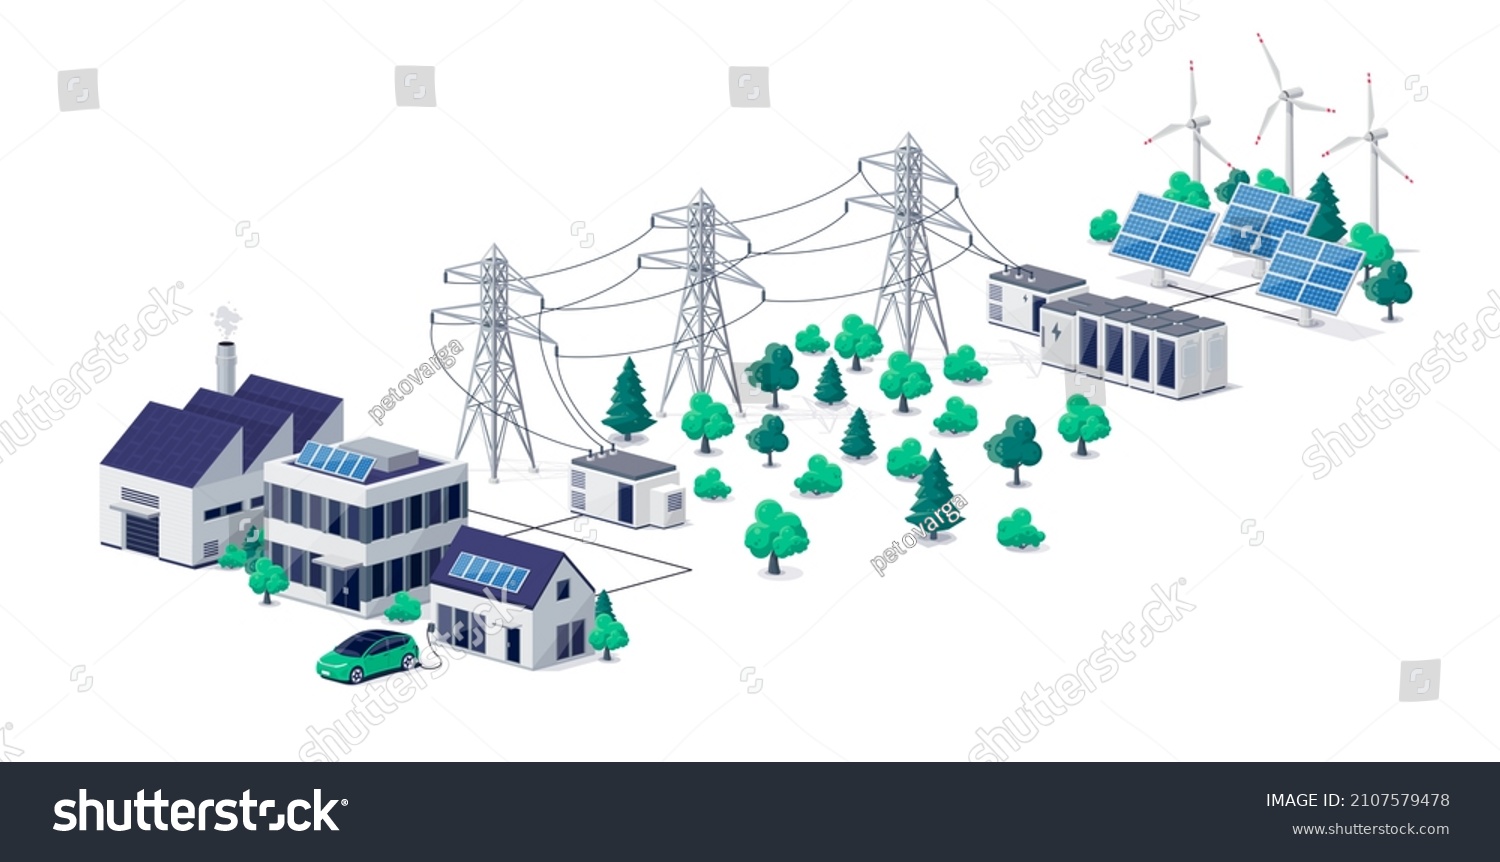 Renewable energy power distribution with house office factory buildings, solar panel plant station, wind and high voltage electricity grid pylons, electric transformer. Smart virtual battery storage. #2107579478